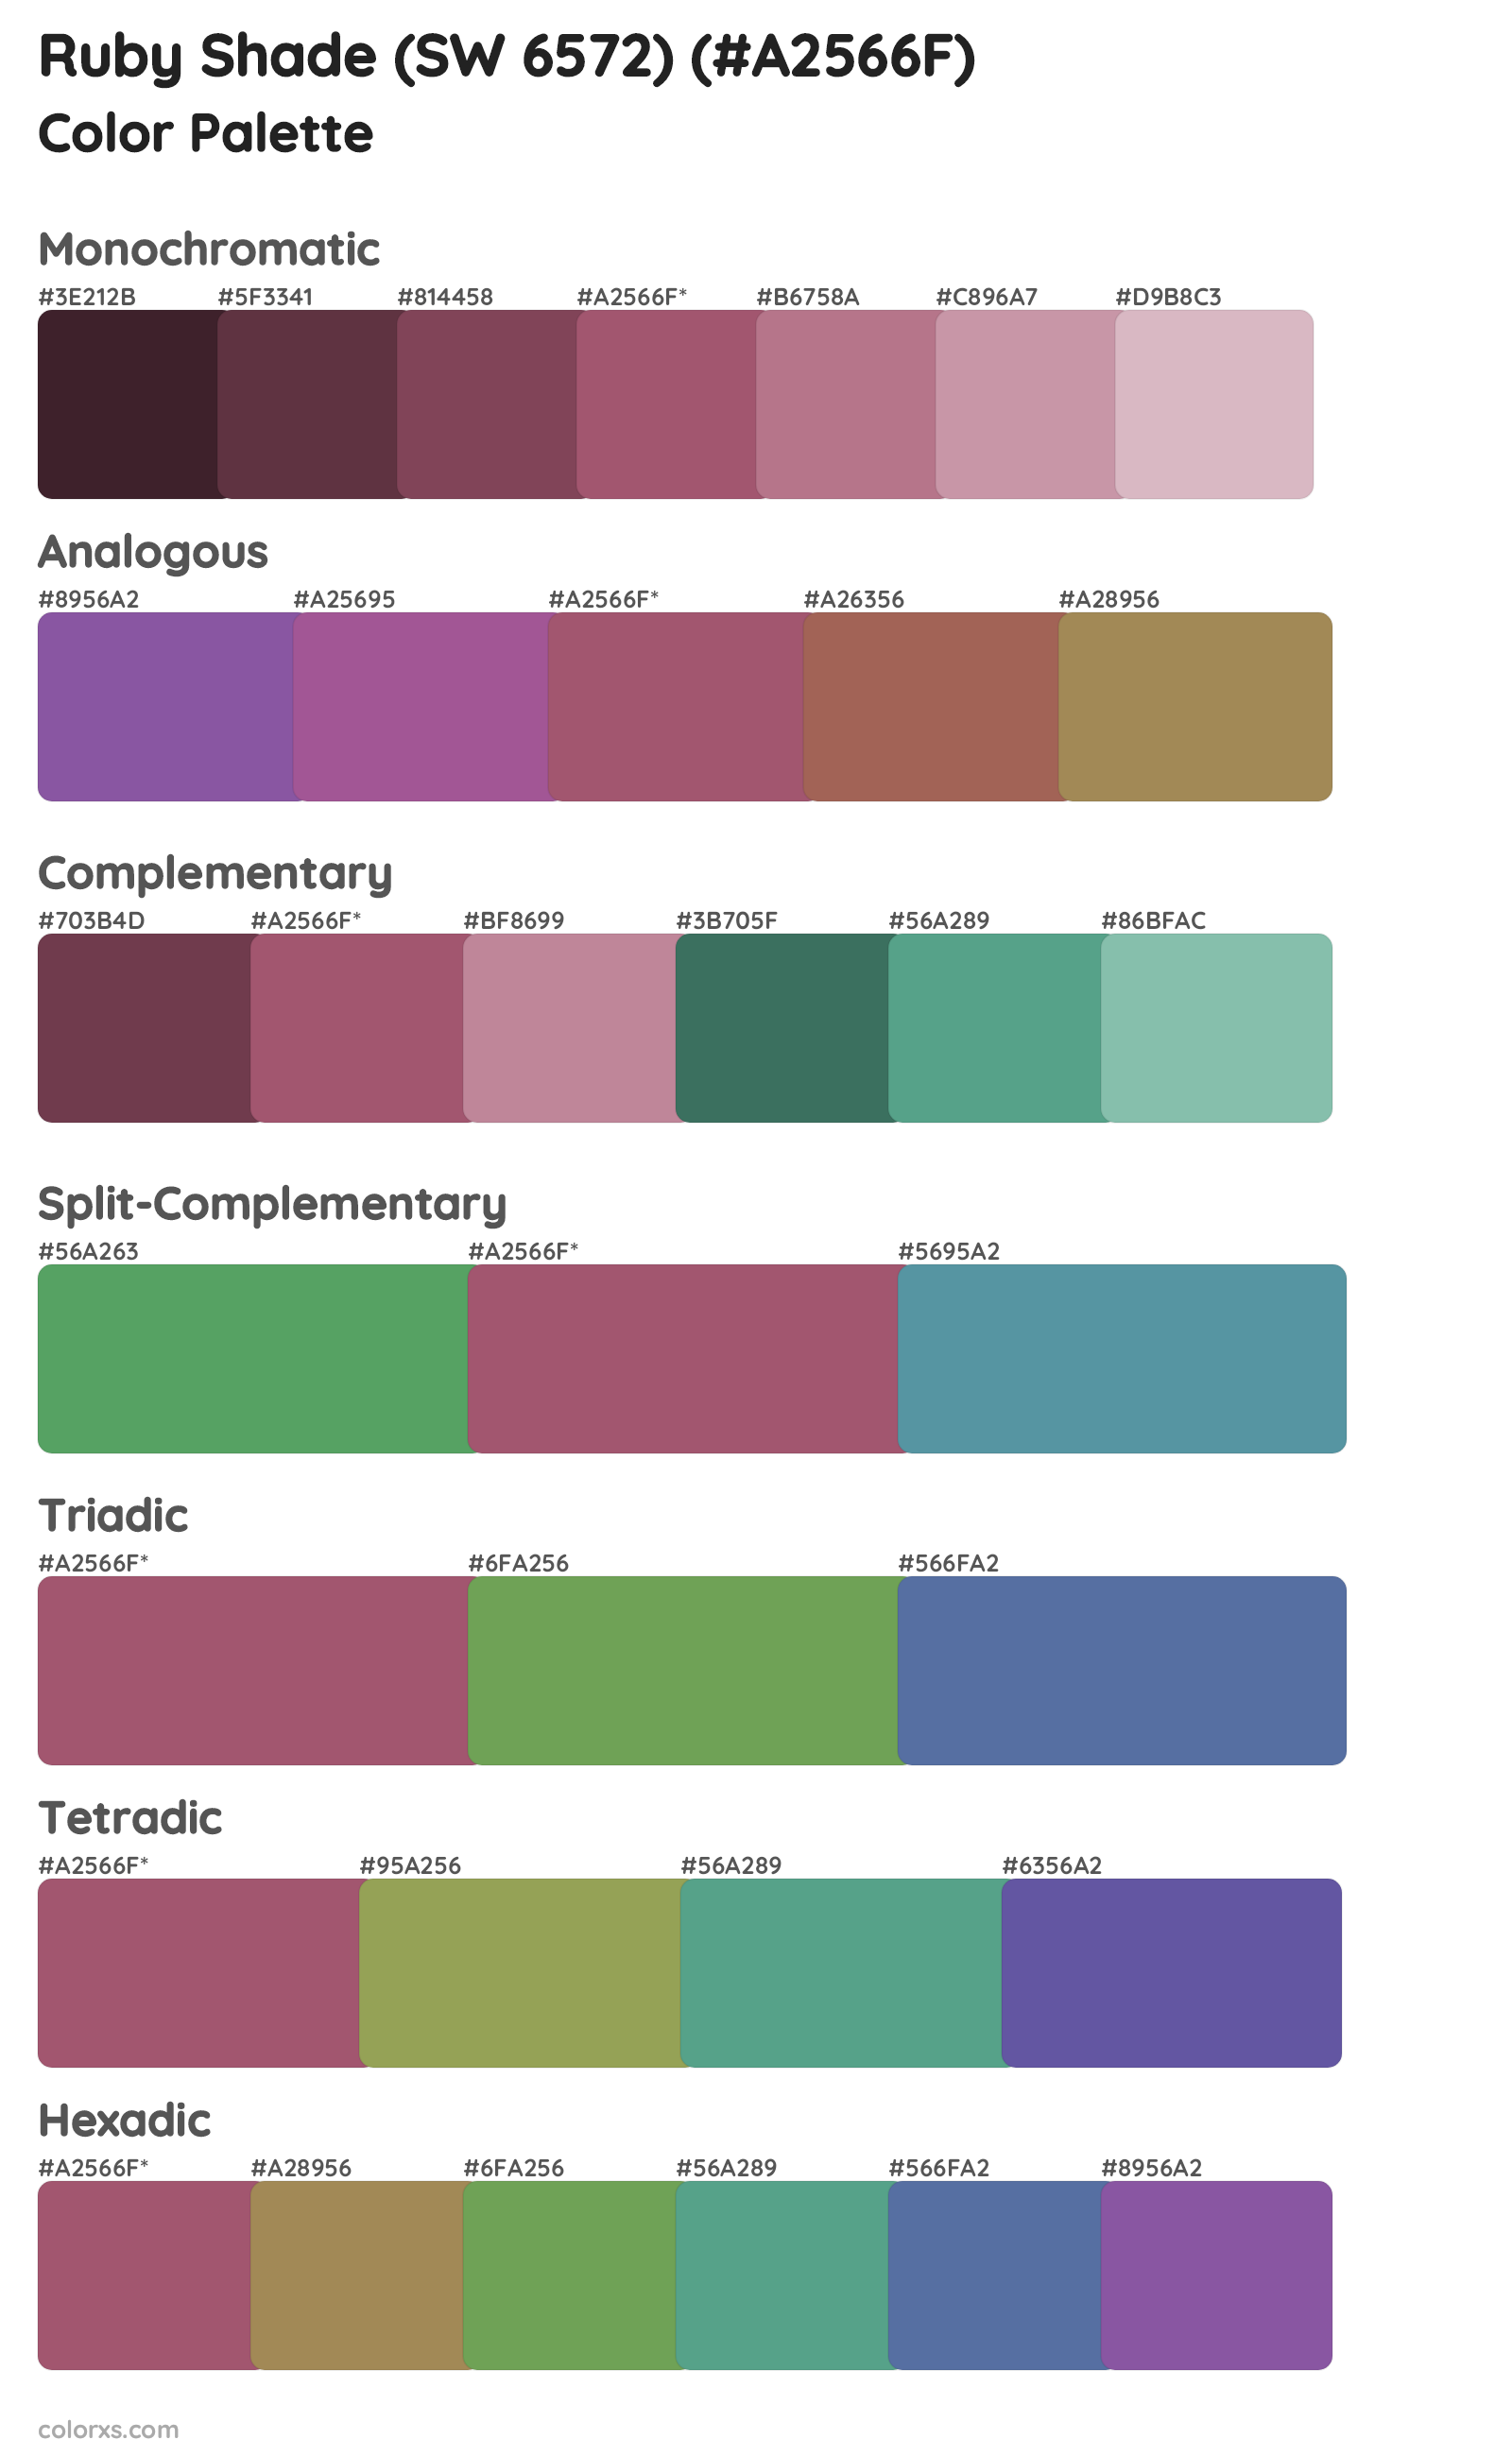 Ruby Shade (SW 6572) Color Scheme Palettes